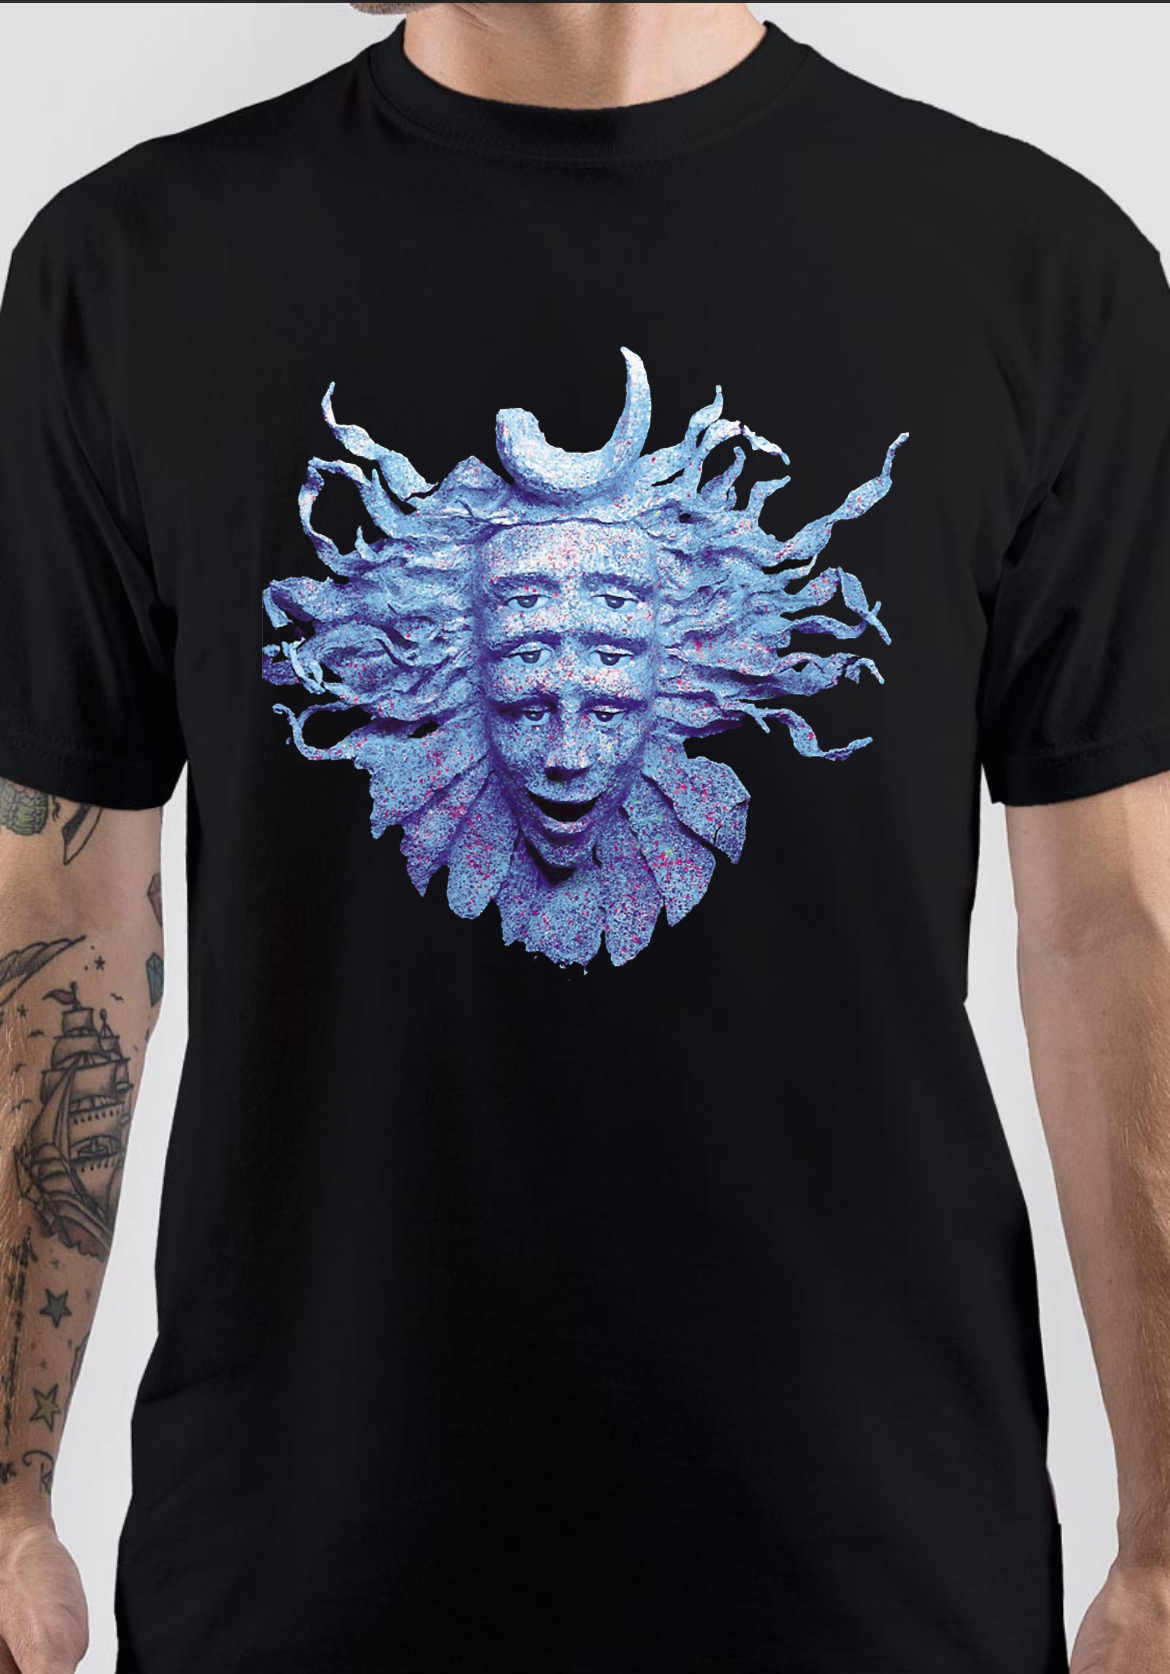 Shpongle T-Shirt And Merchandise